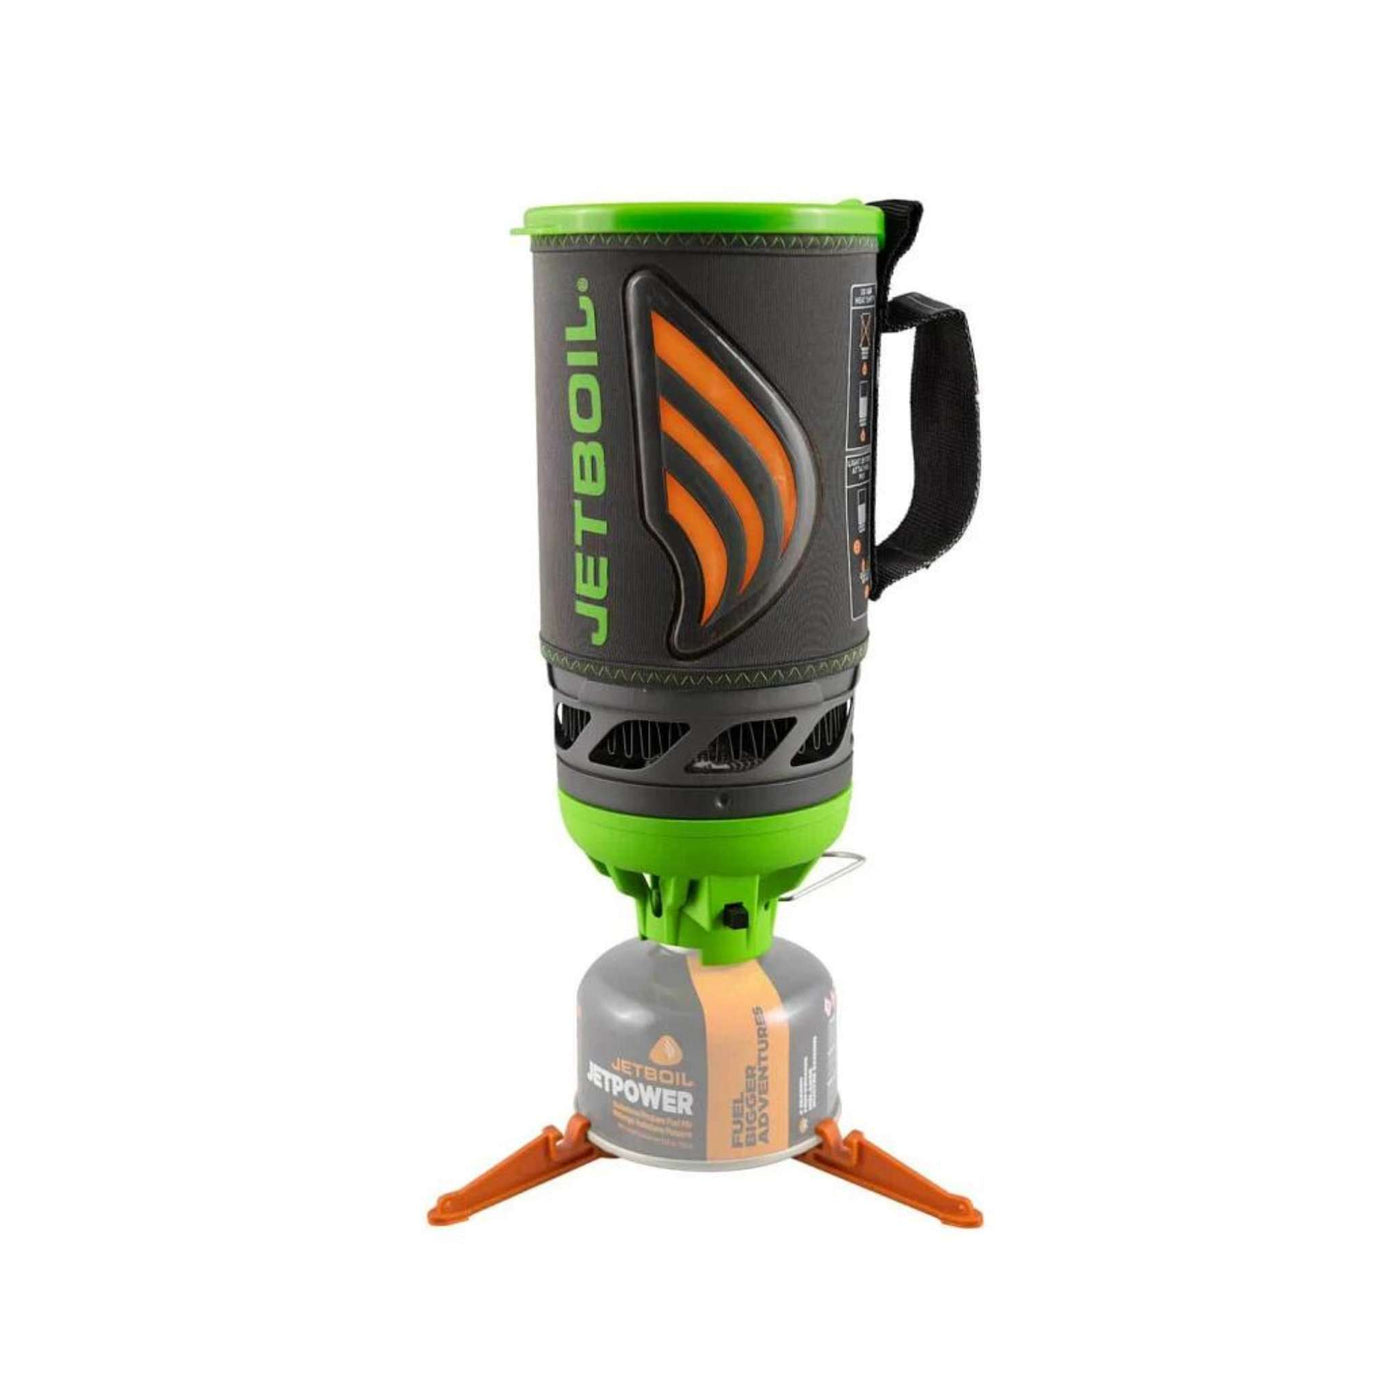 Jetboil Flash Java 2.0 | Camping & Backcountry Cooking | Further Faster Christchurch NZ | #ecto